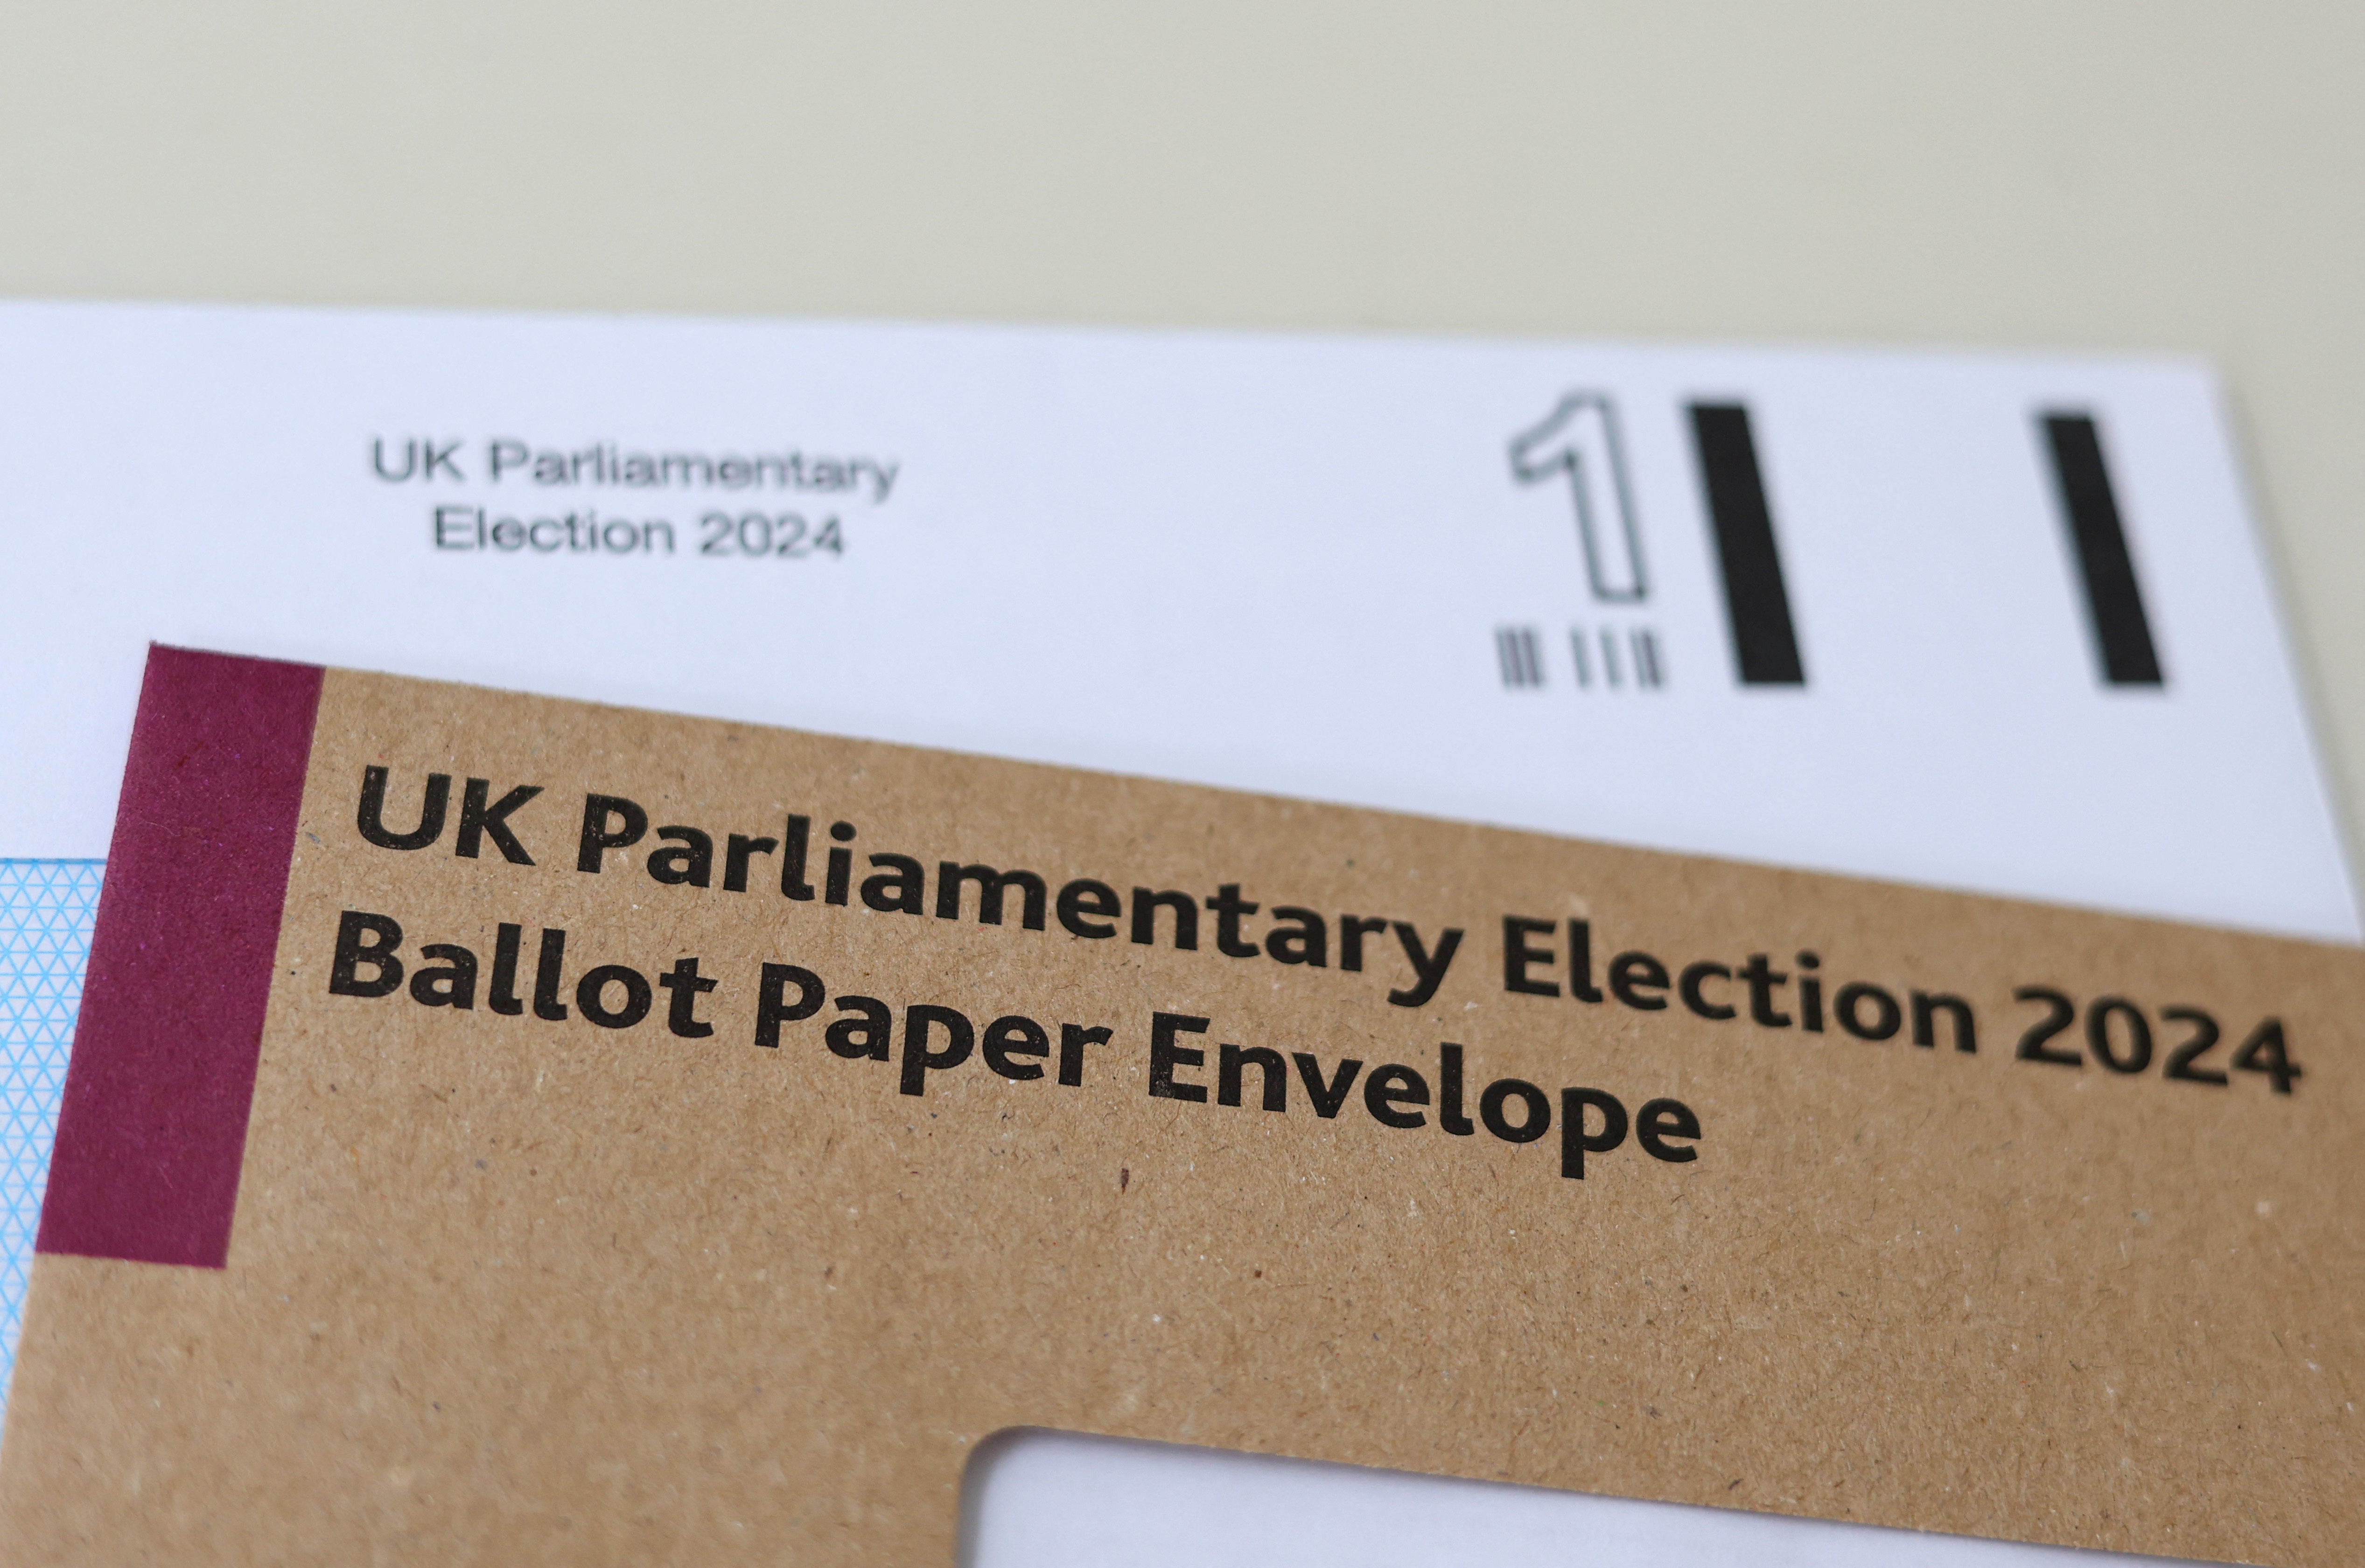 Postal votes have been delayed in some areas